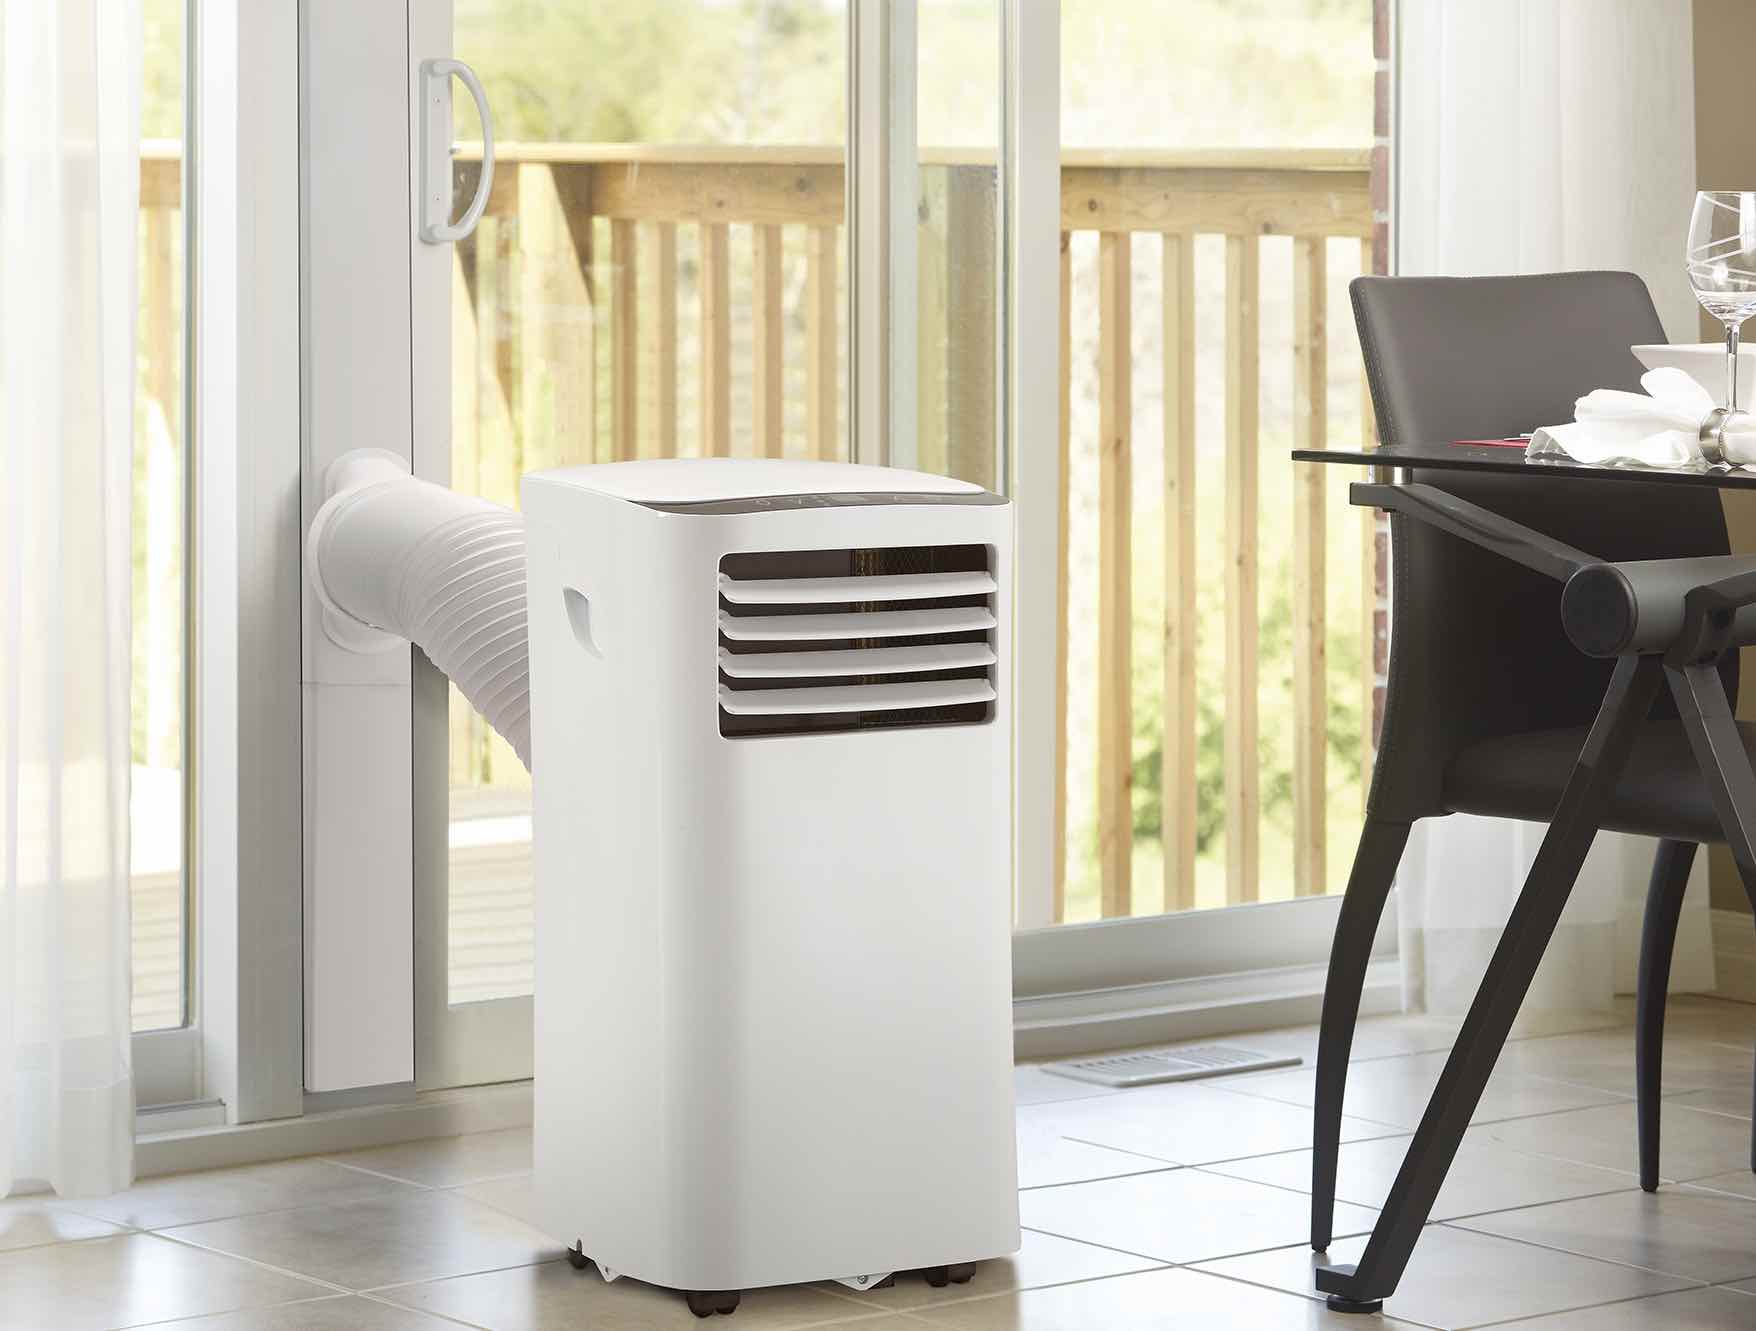 How Do You Clean A Portable Air Conditioner